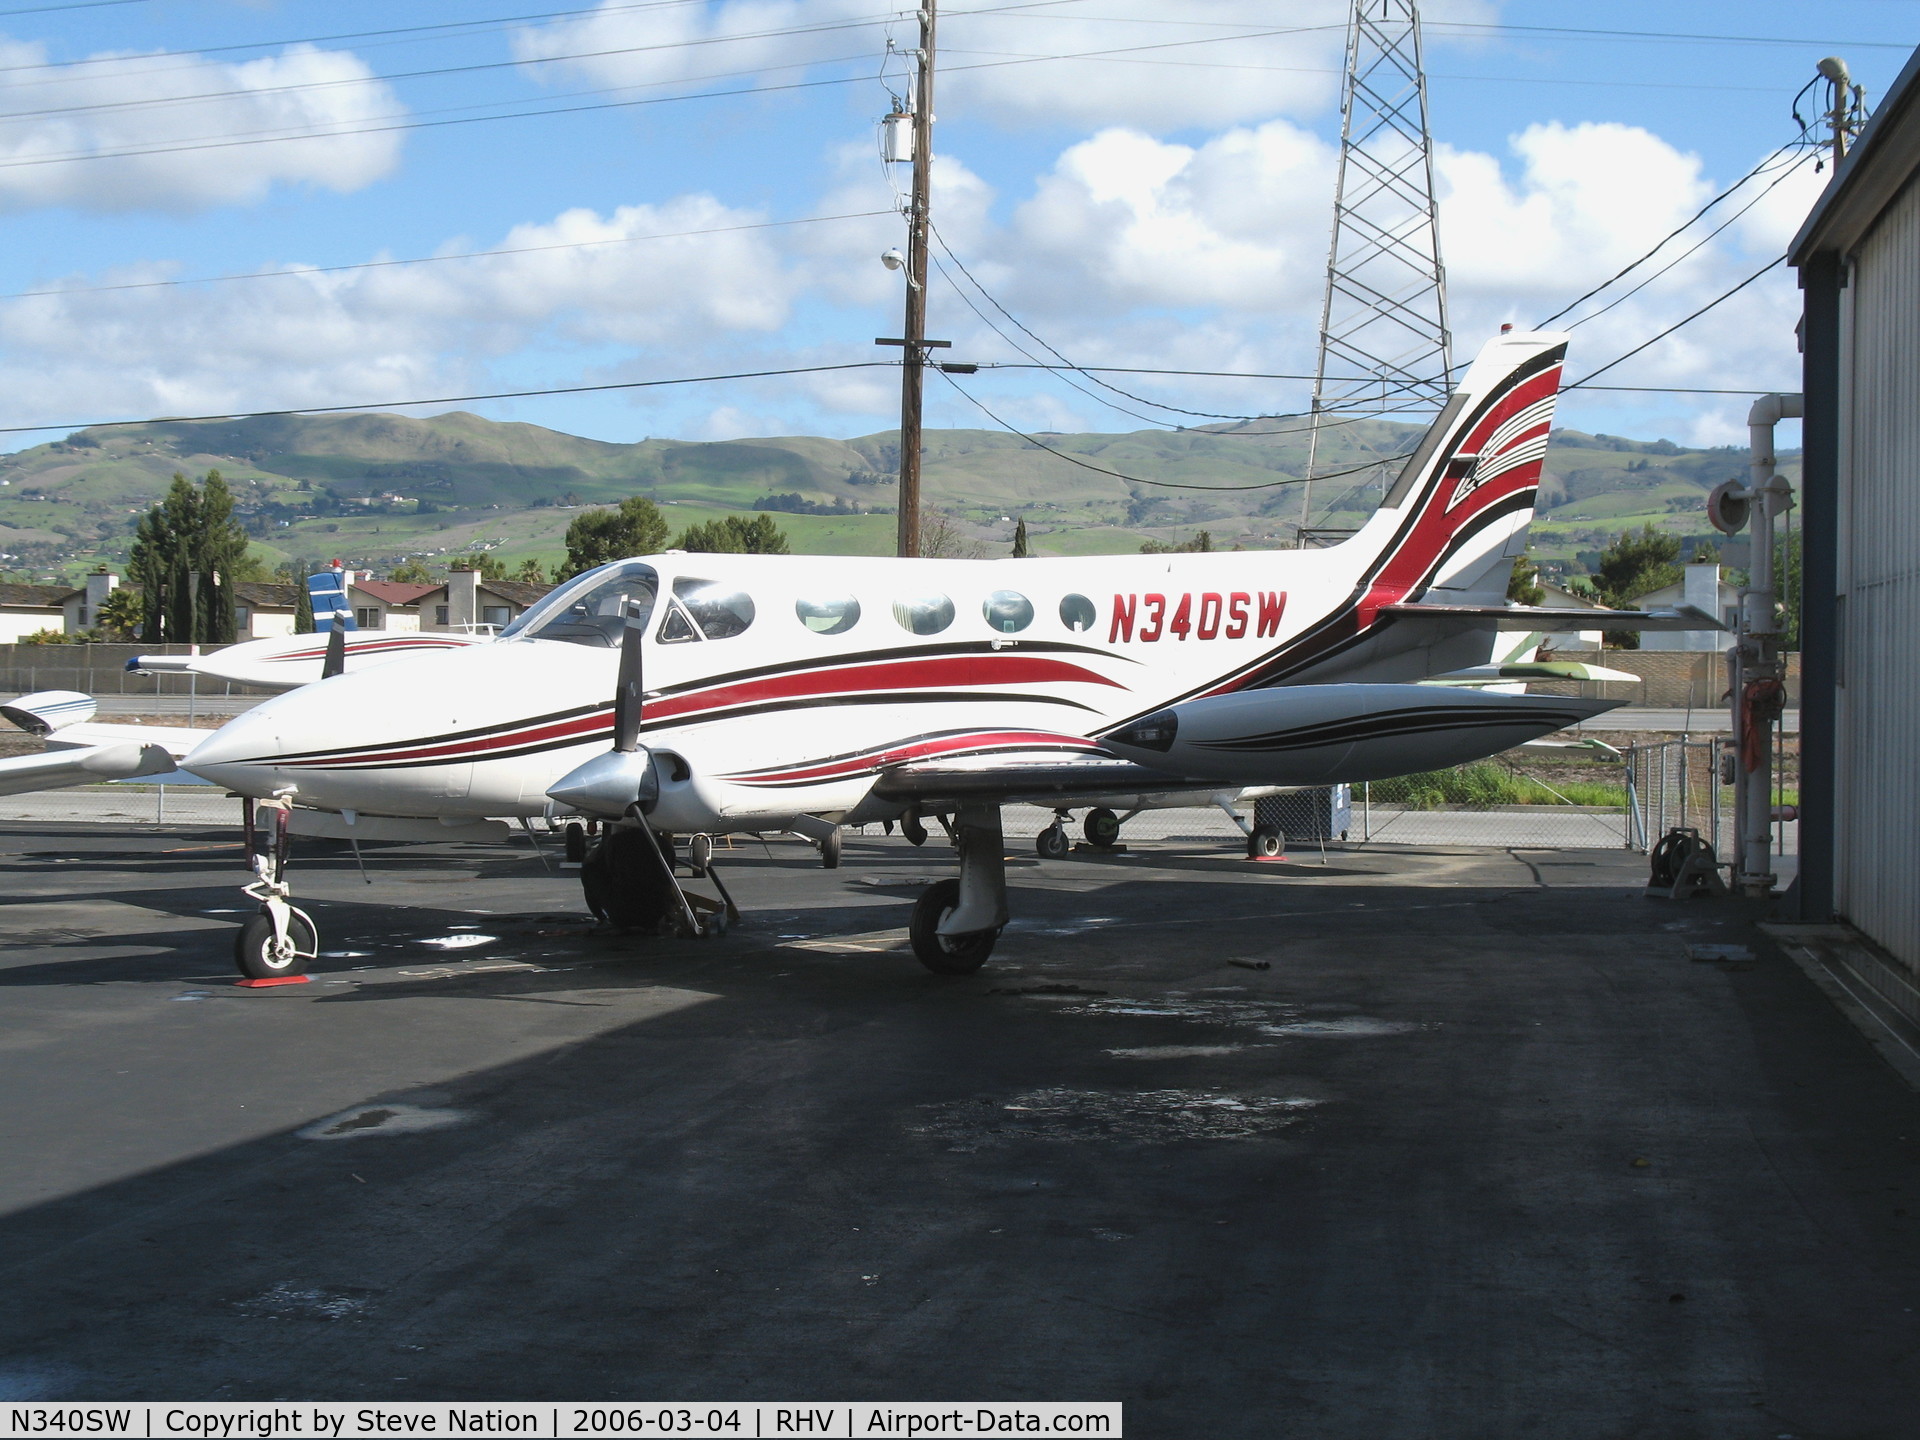 N340SW, 1978 Cessna 340A C/N 340A0531, Levin Aircraft Corp 1978 Cessna 340A at Reid-Hillview Airport (San Jose), CA